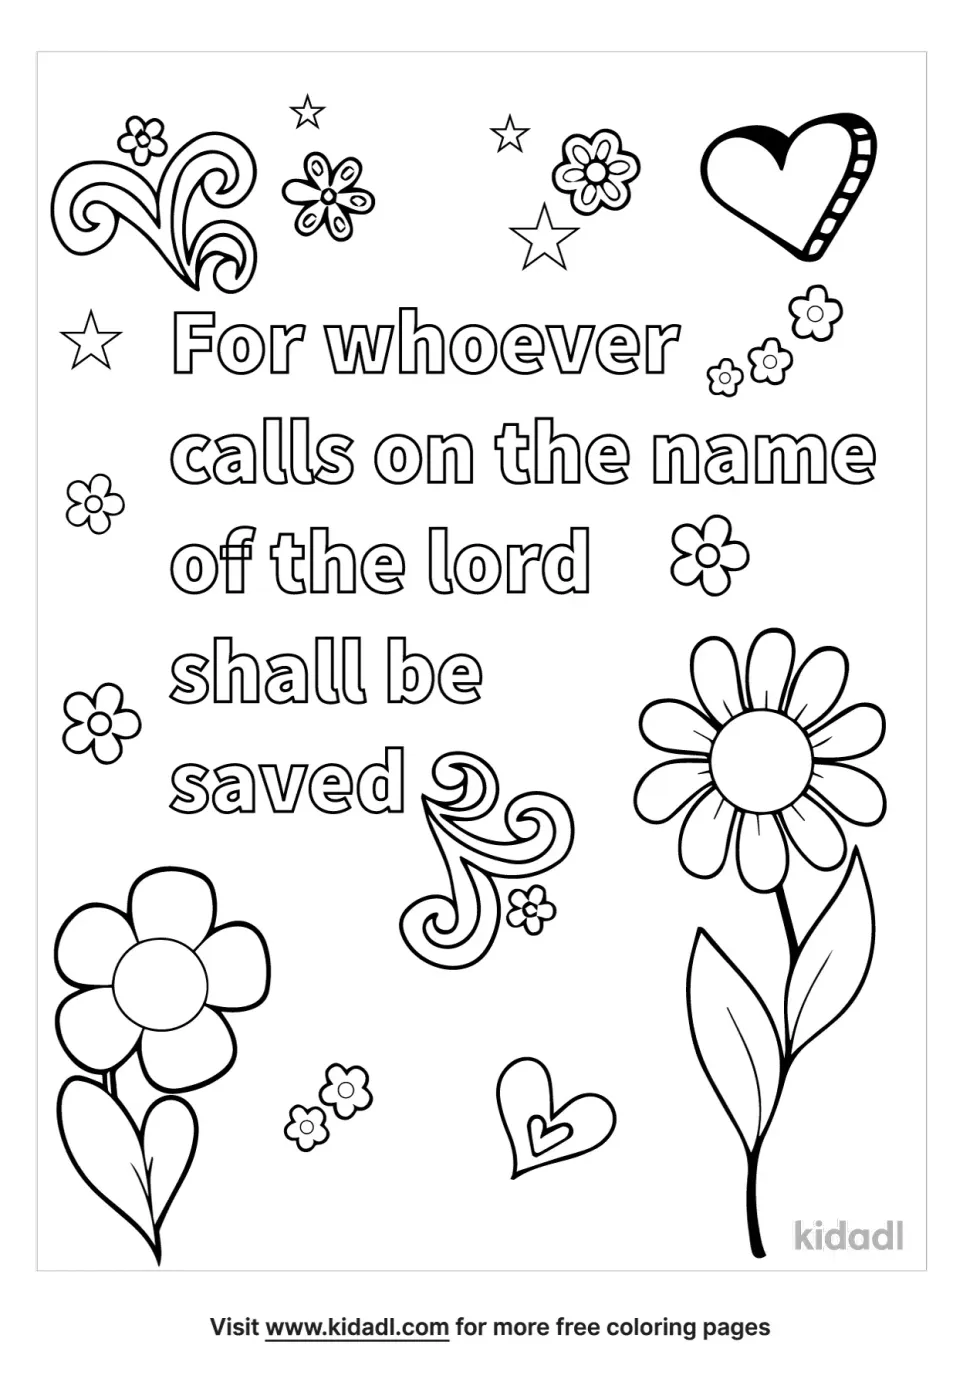 Whoever Calls On The Name Of The Lord Shall Be Saved